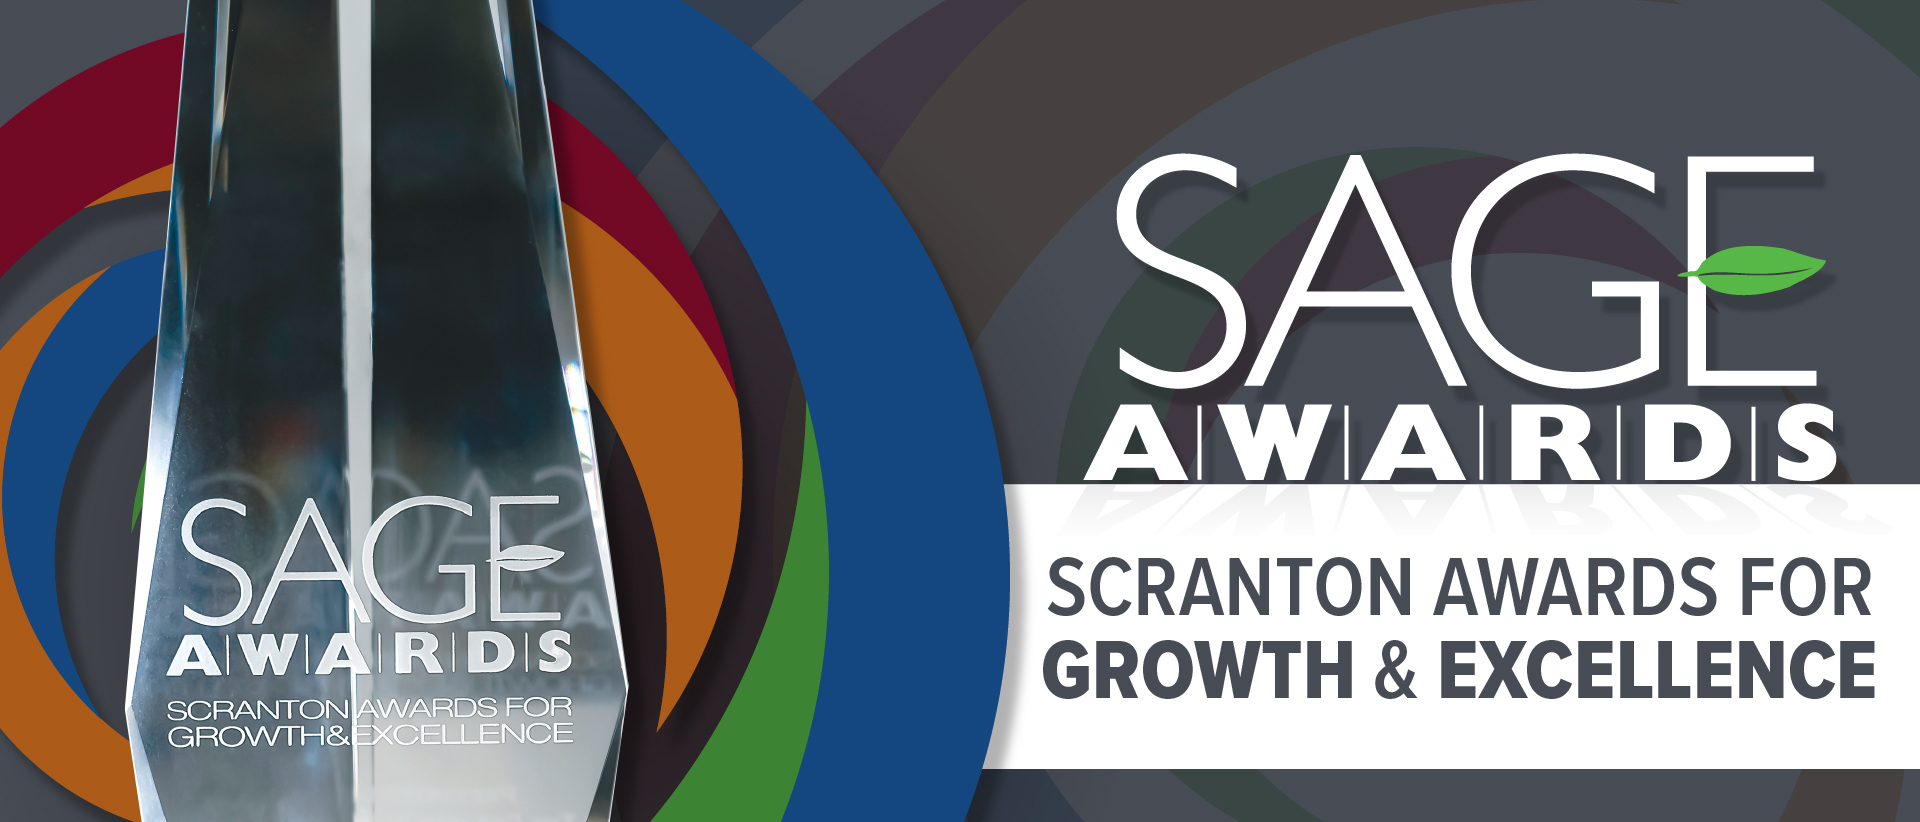 Chamber Announces Fall 2021 SAGE Awards Finalists